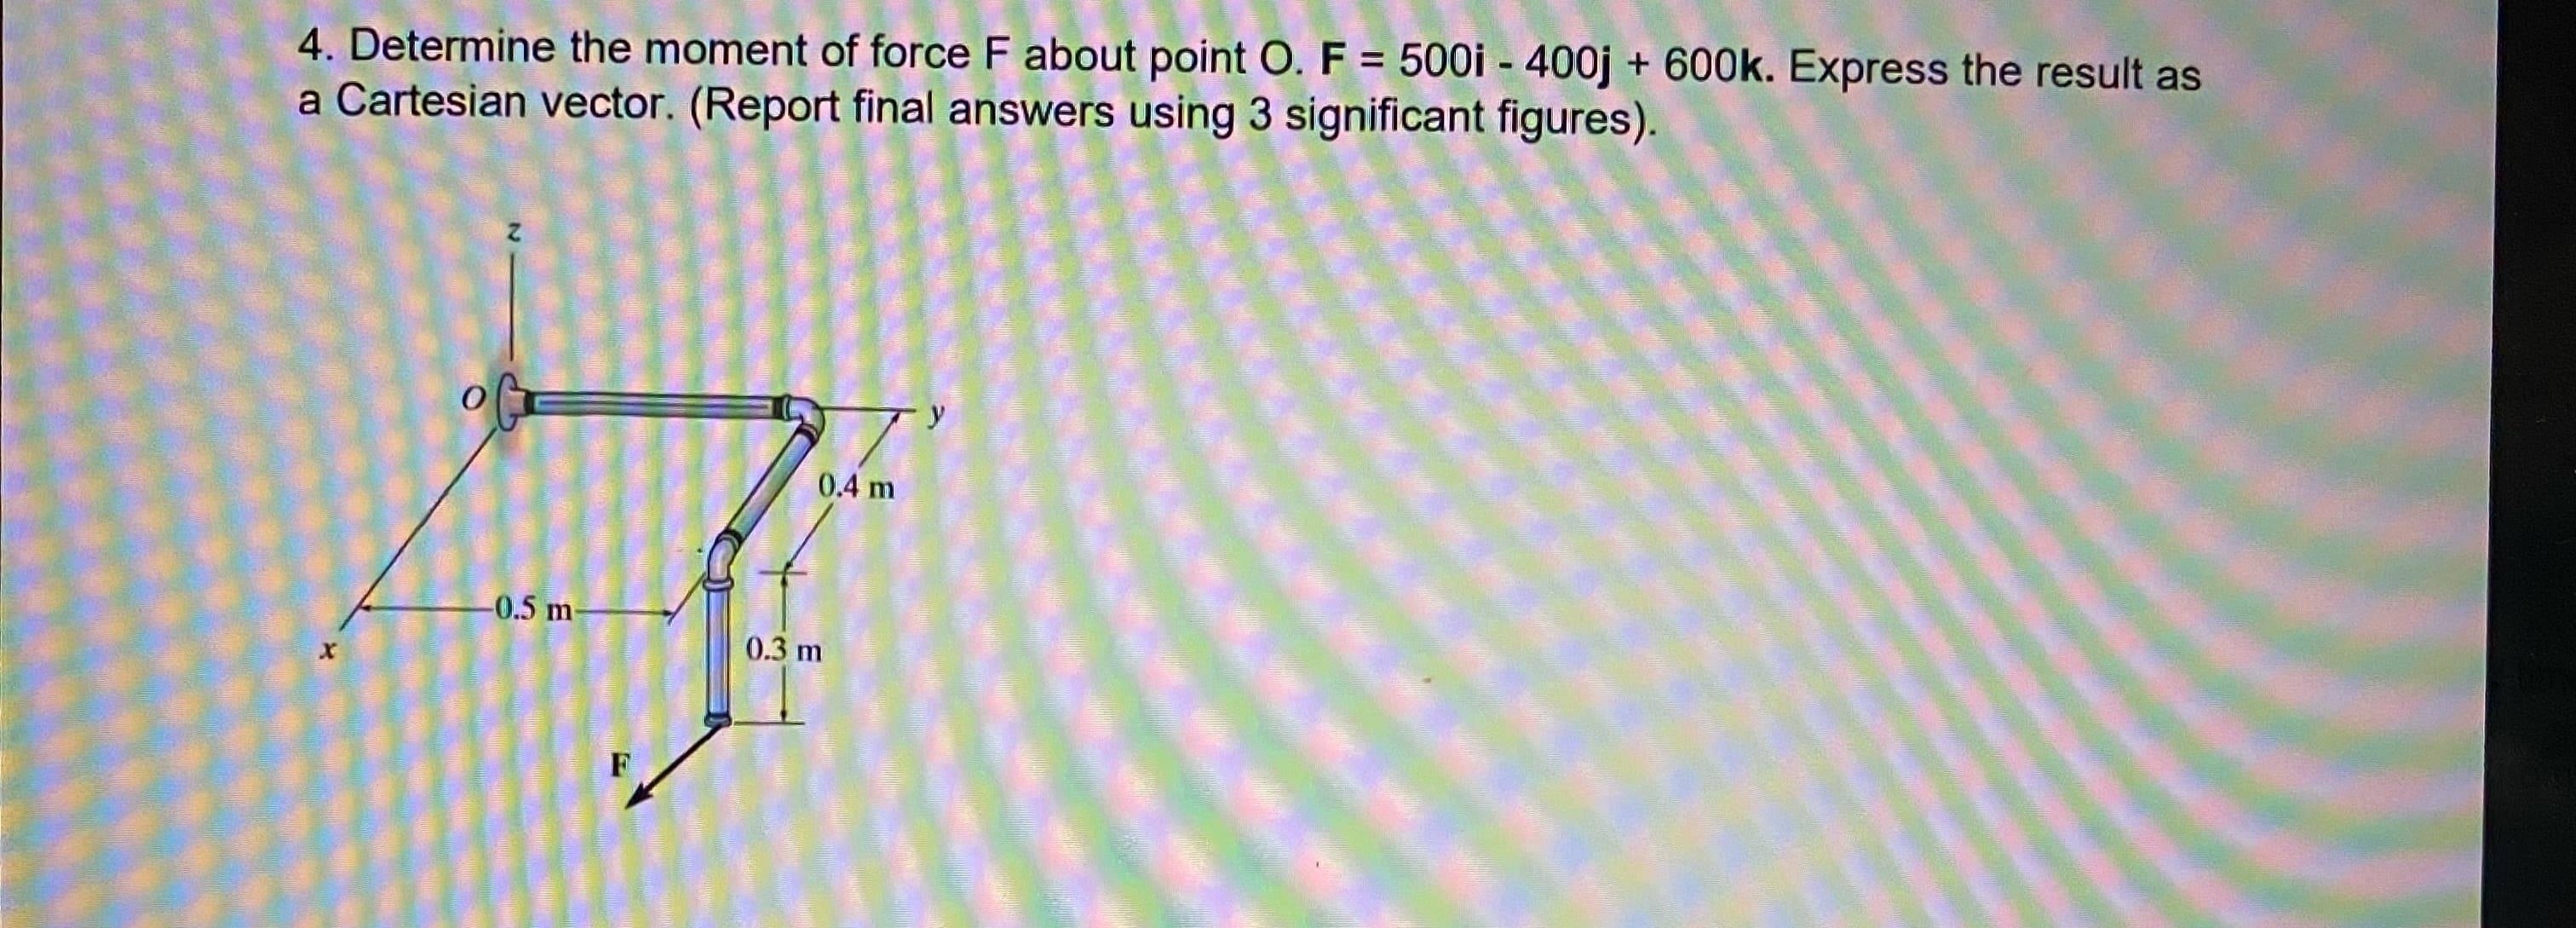 4. Determine the moment of force F about point O. F = 500i - 400j + 600k. Express the result as
a Cartesian vector. (Report final answers using 3 significant figures).
%3D
0.4 m
-0.5 m-
0.3 m
